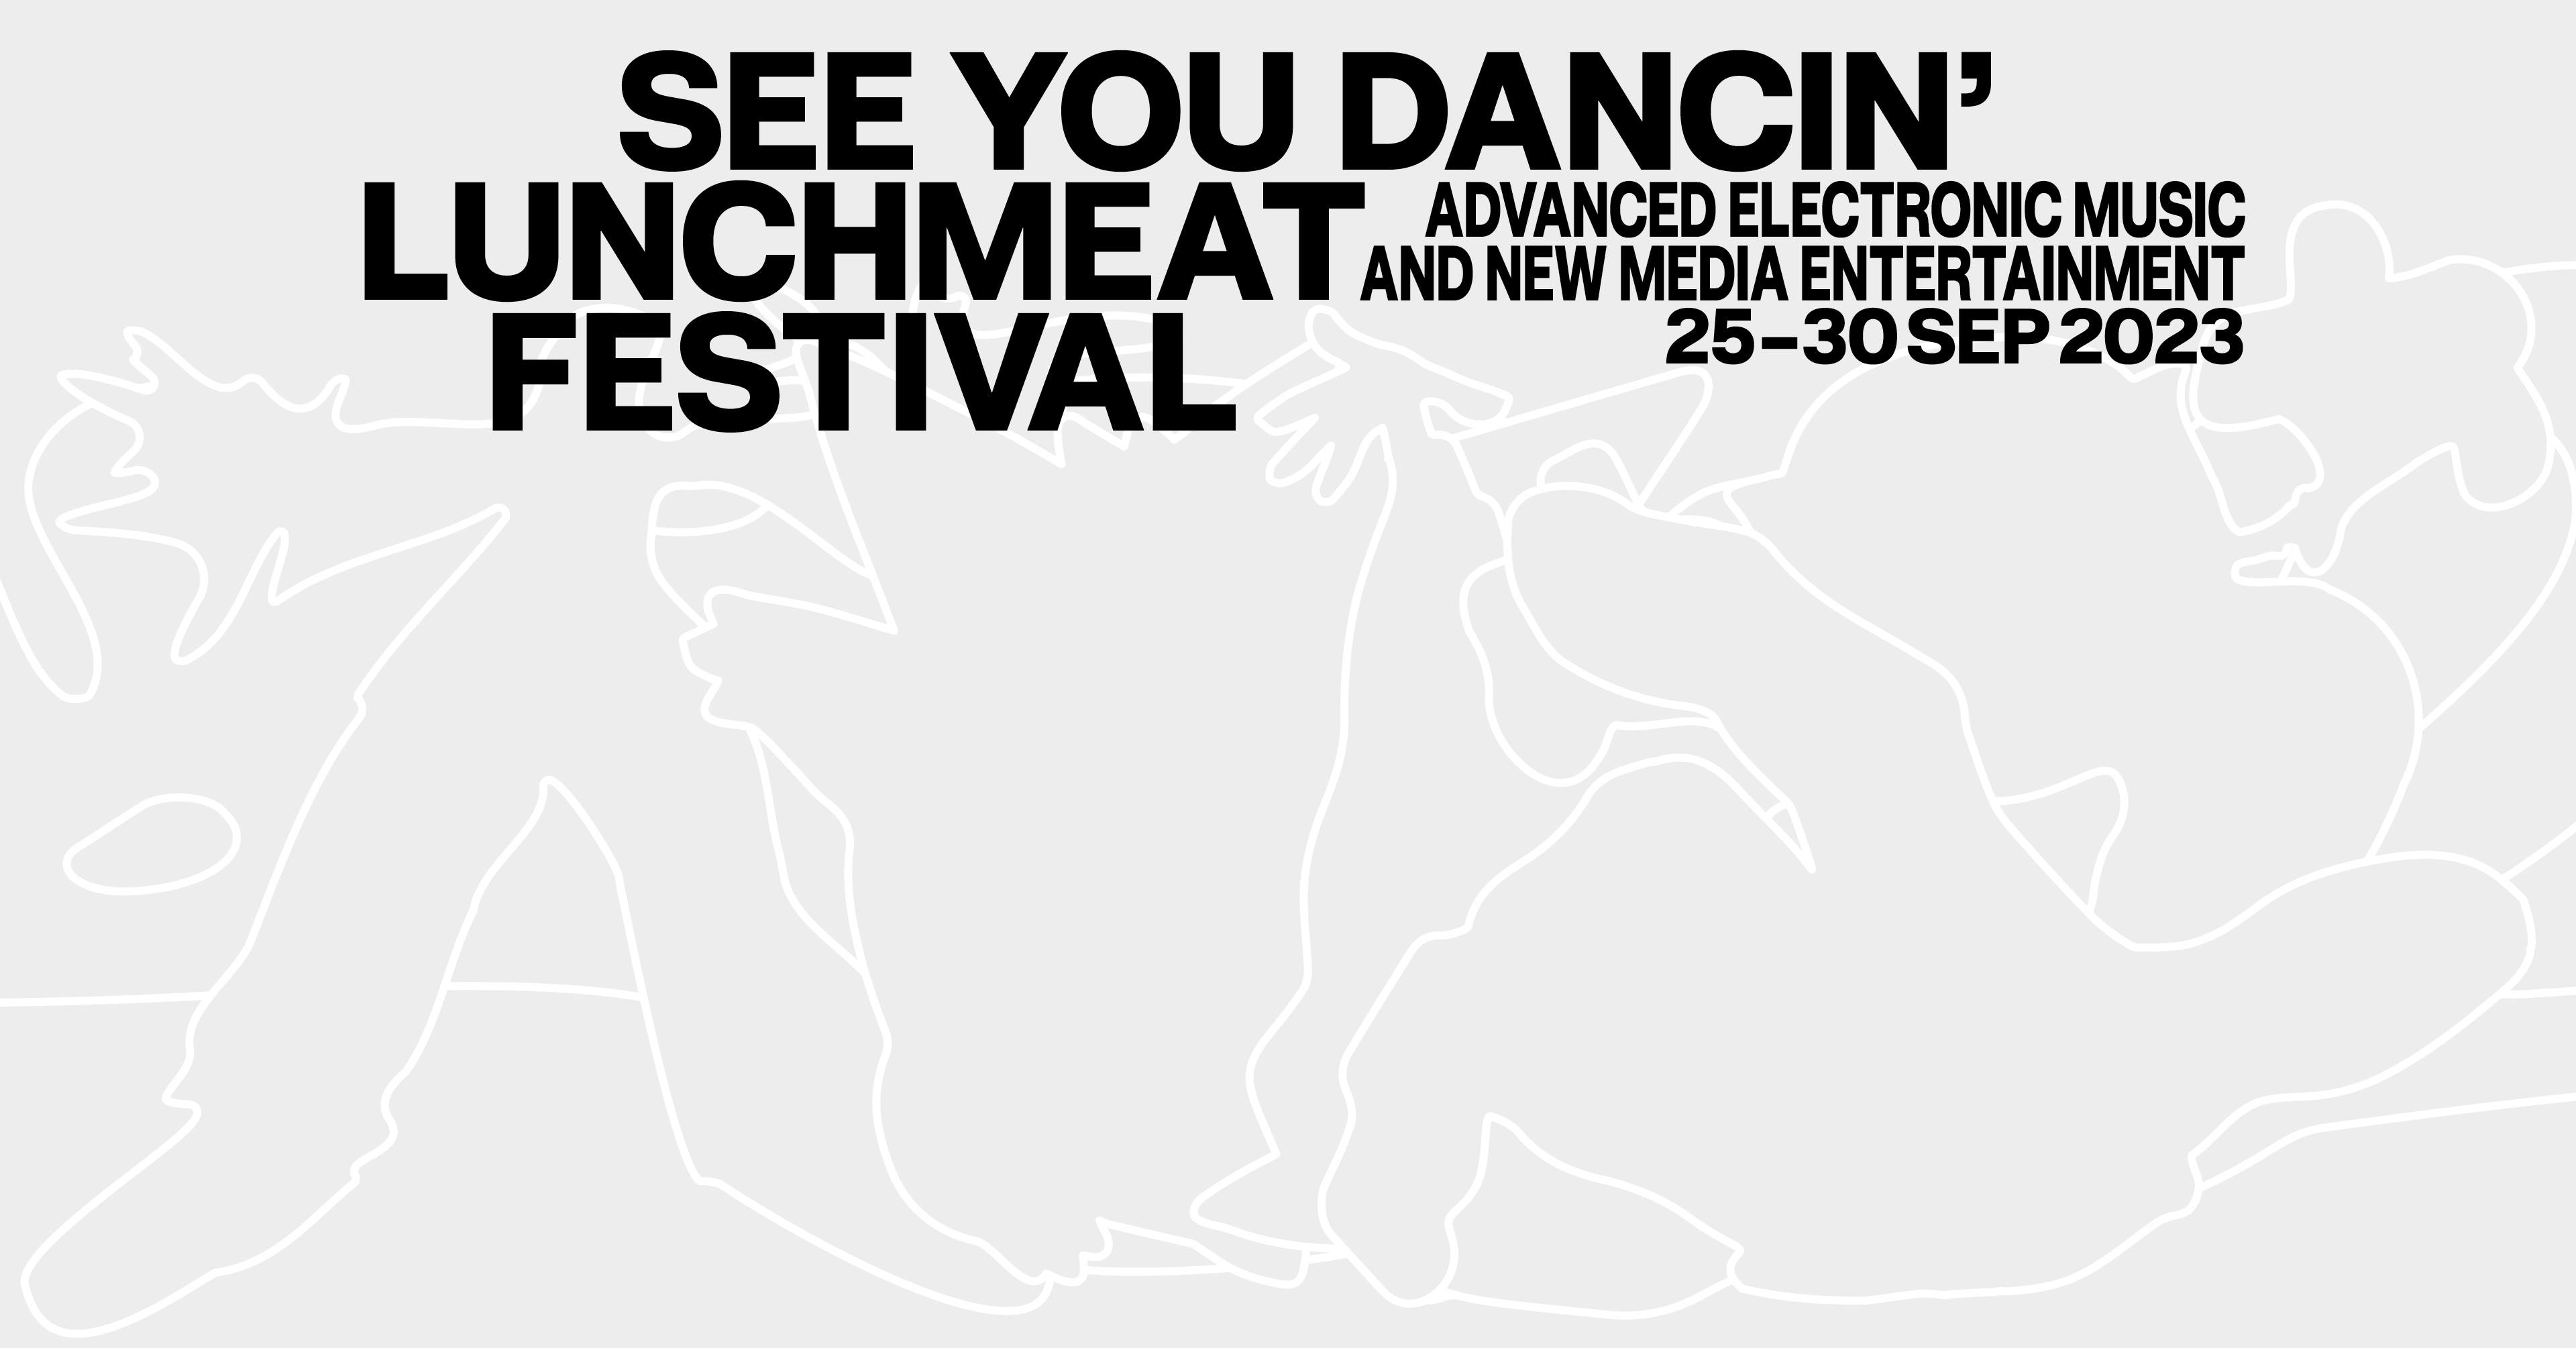 Lunchmeat Festival 2023 - フライヤー表